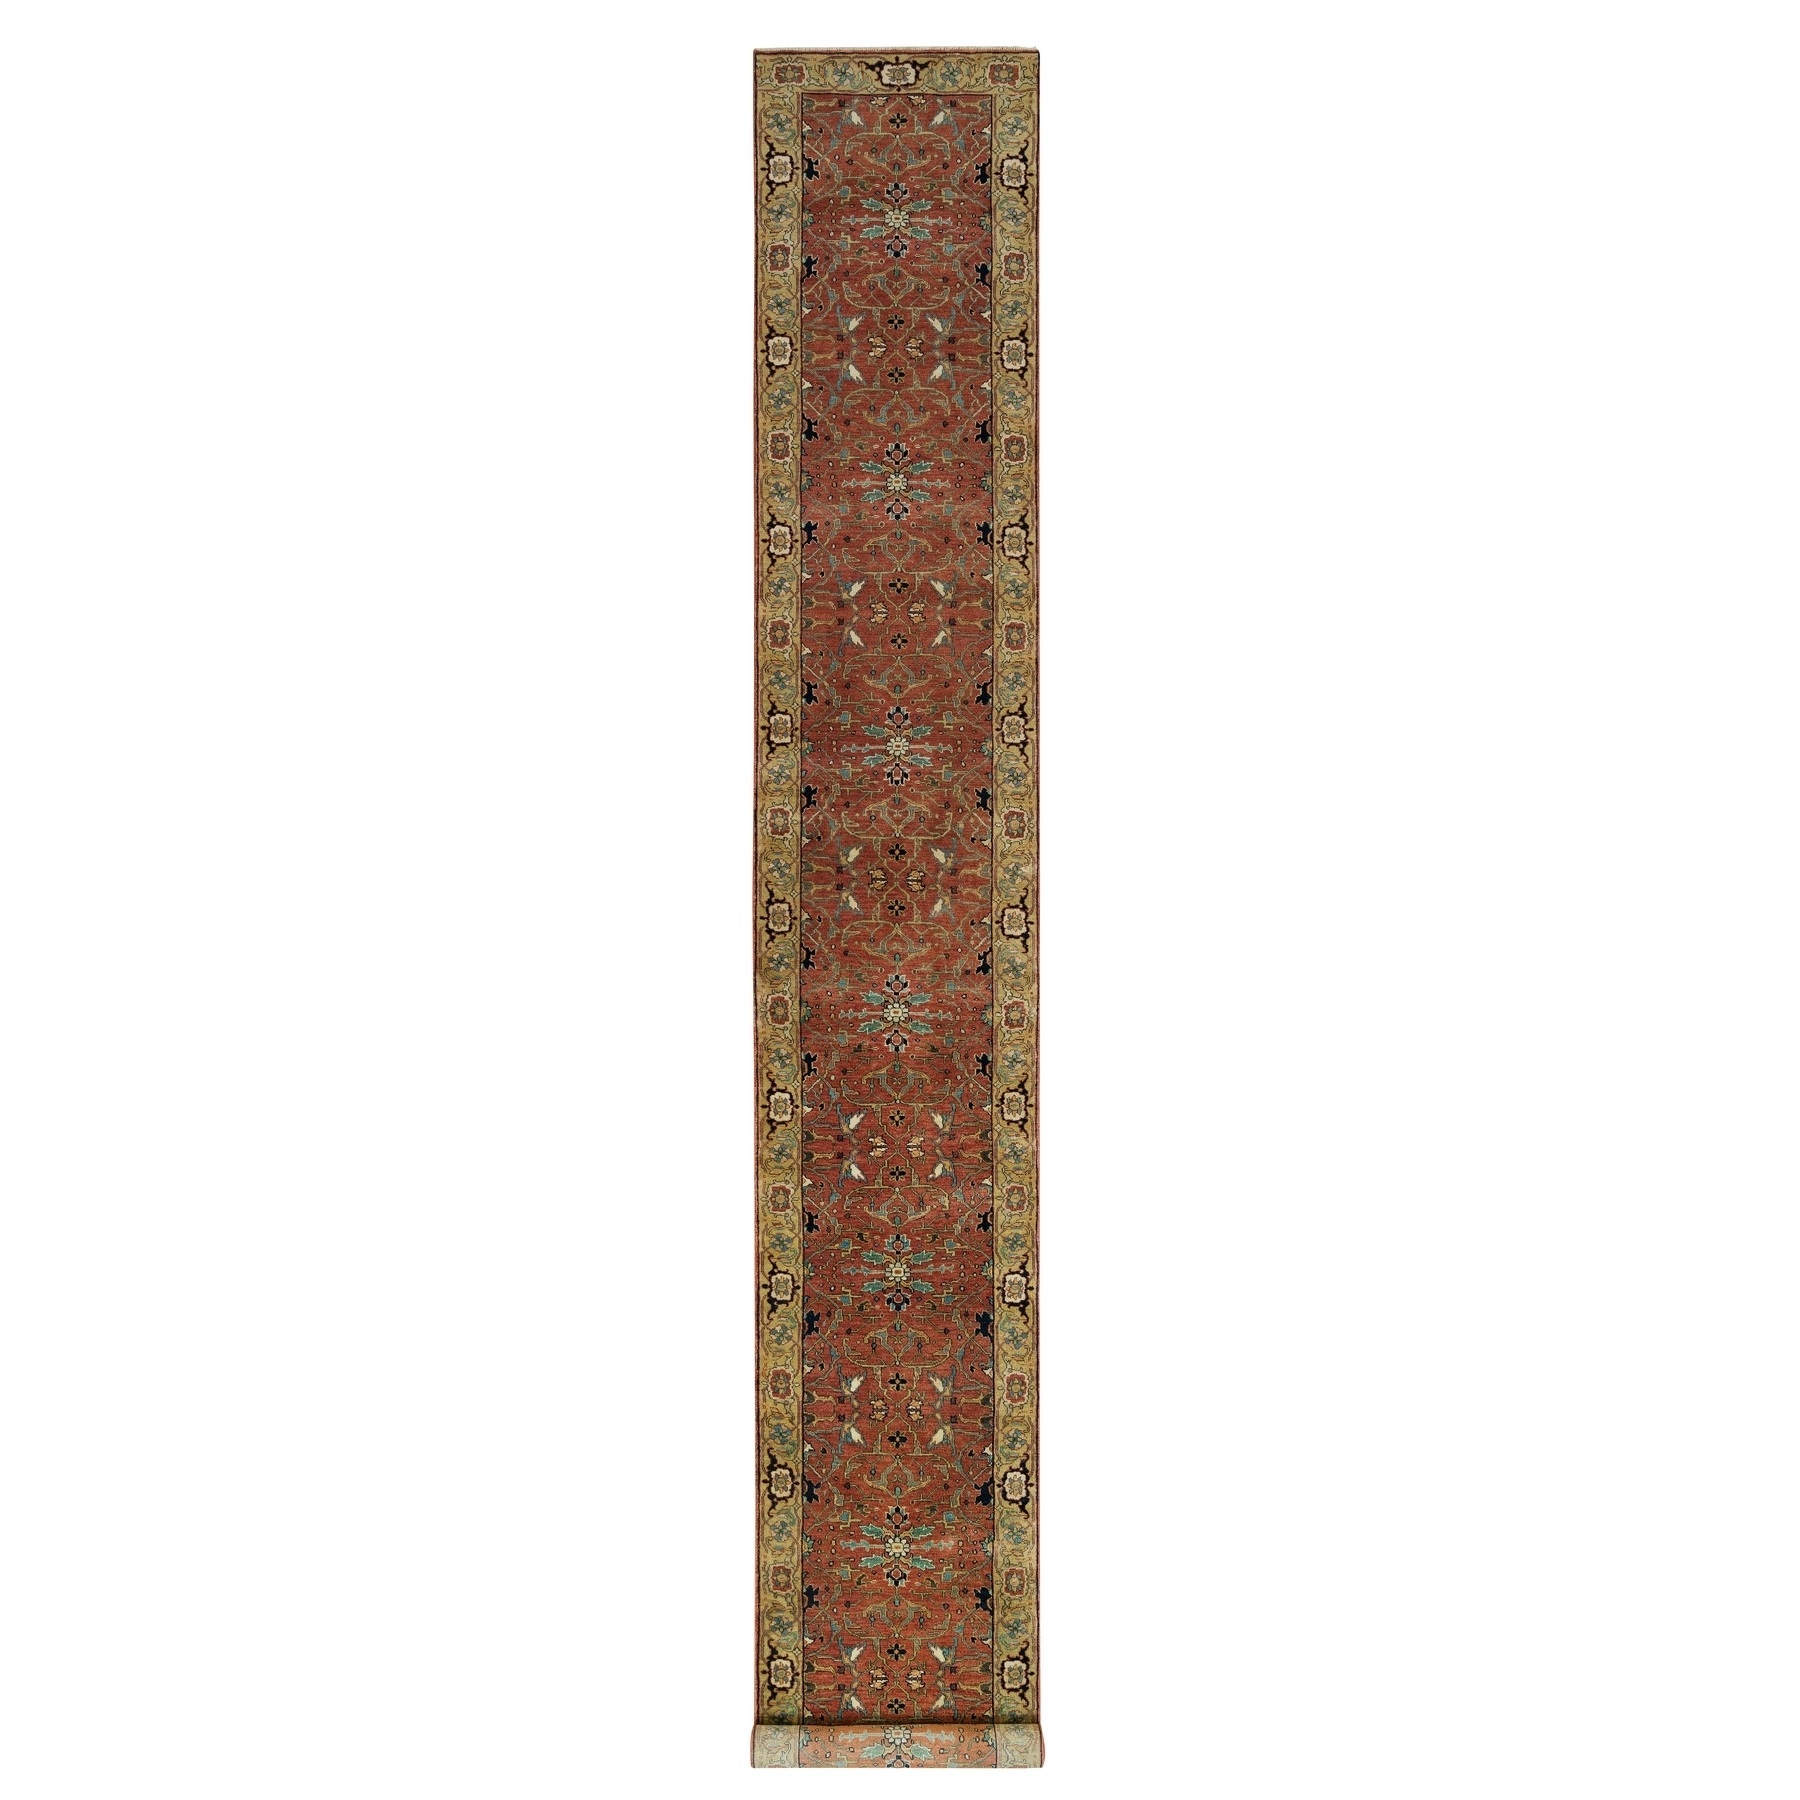 2'7"x17'9" Brick Red, Antiqued Densely Woven Fine Heriz Re-Creation, Hand Woven, Vegetable Dyes, Soft and Plush, 100% Wool, Runner Oriental Rug 